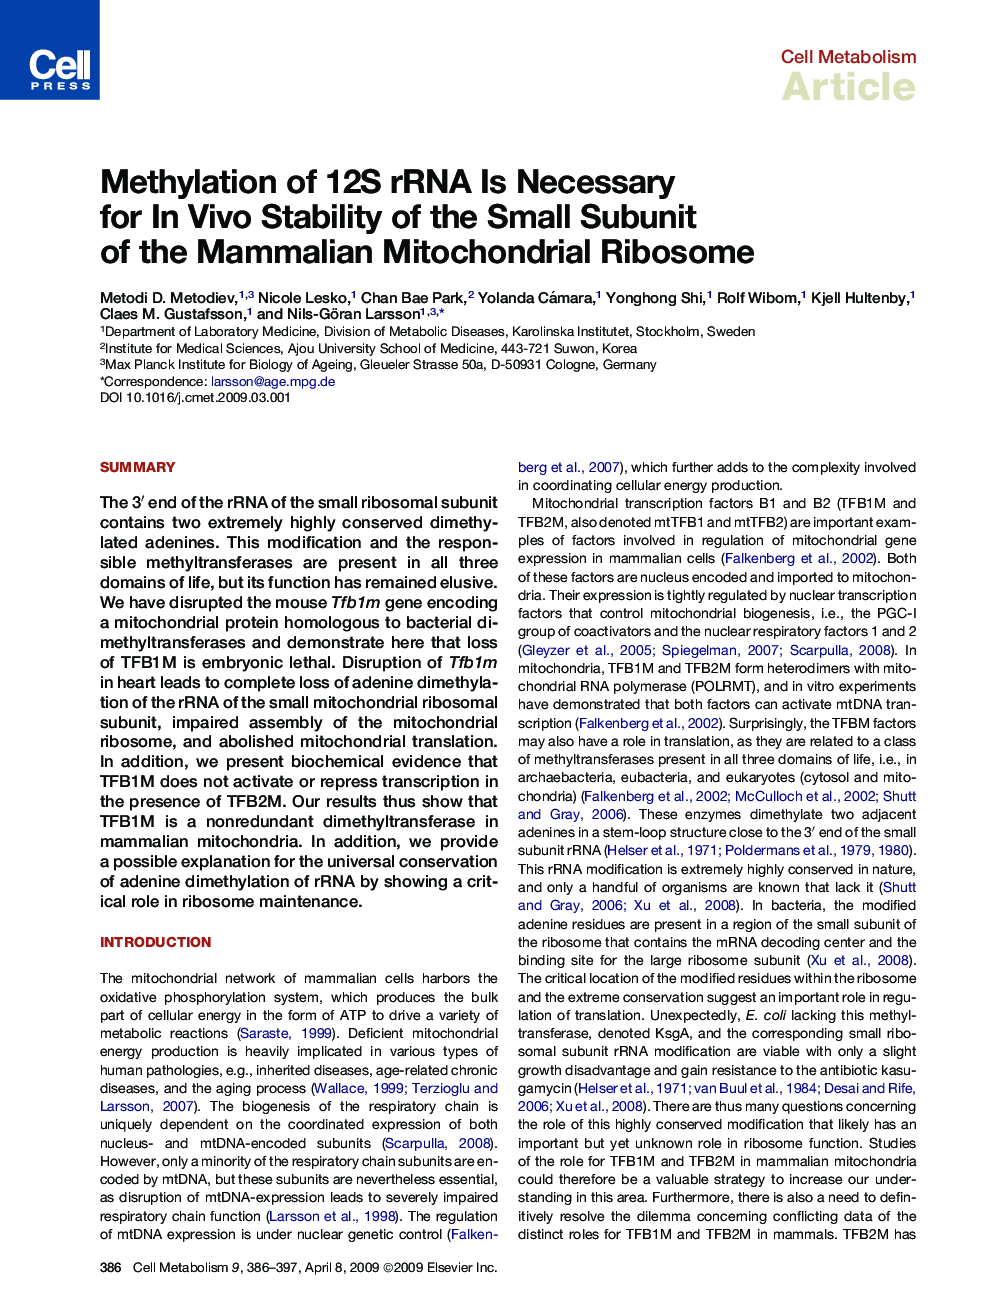 Methylation of 12S rRNA Is Necessary for In Vivo Stability of the Small Subunit of the Mammalian Mitochondrial Ribosome